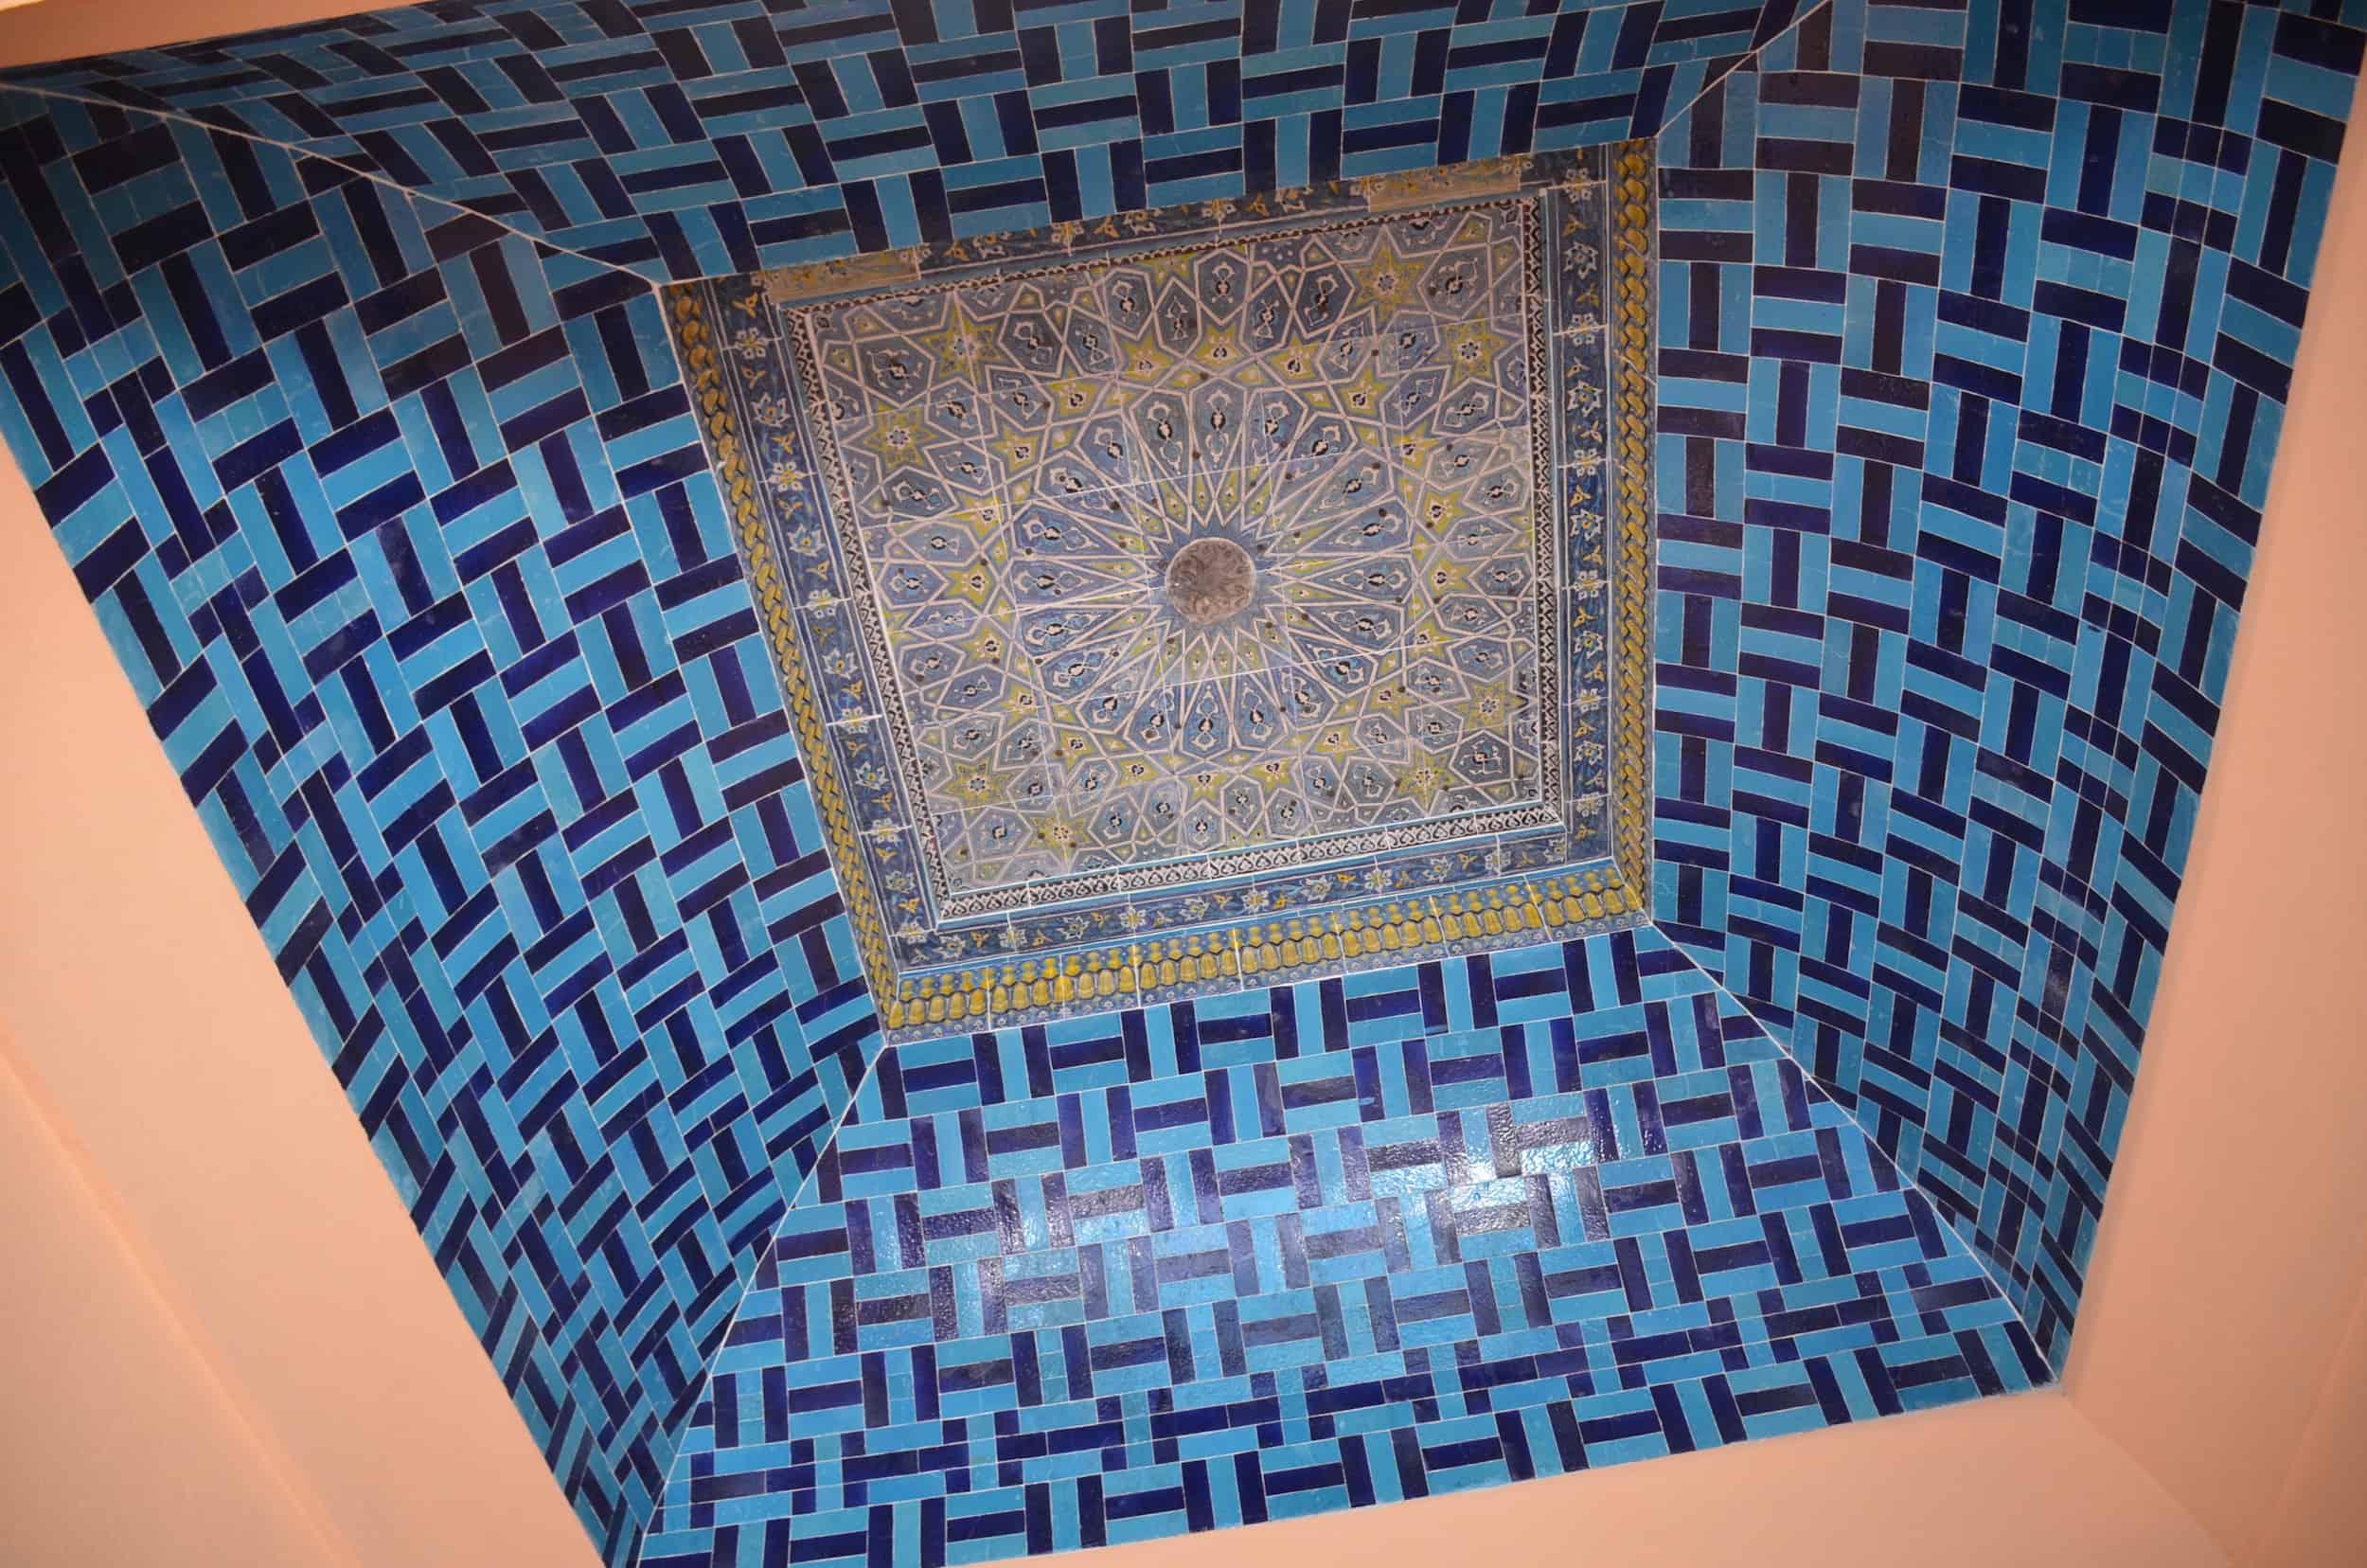 Tiles on the ceiling of a student cell of the Green Madrasa at the Bursa Museum of Turkish and Islamic Arts in Bursa, Turkey